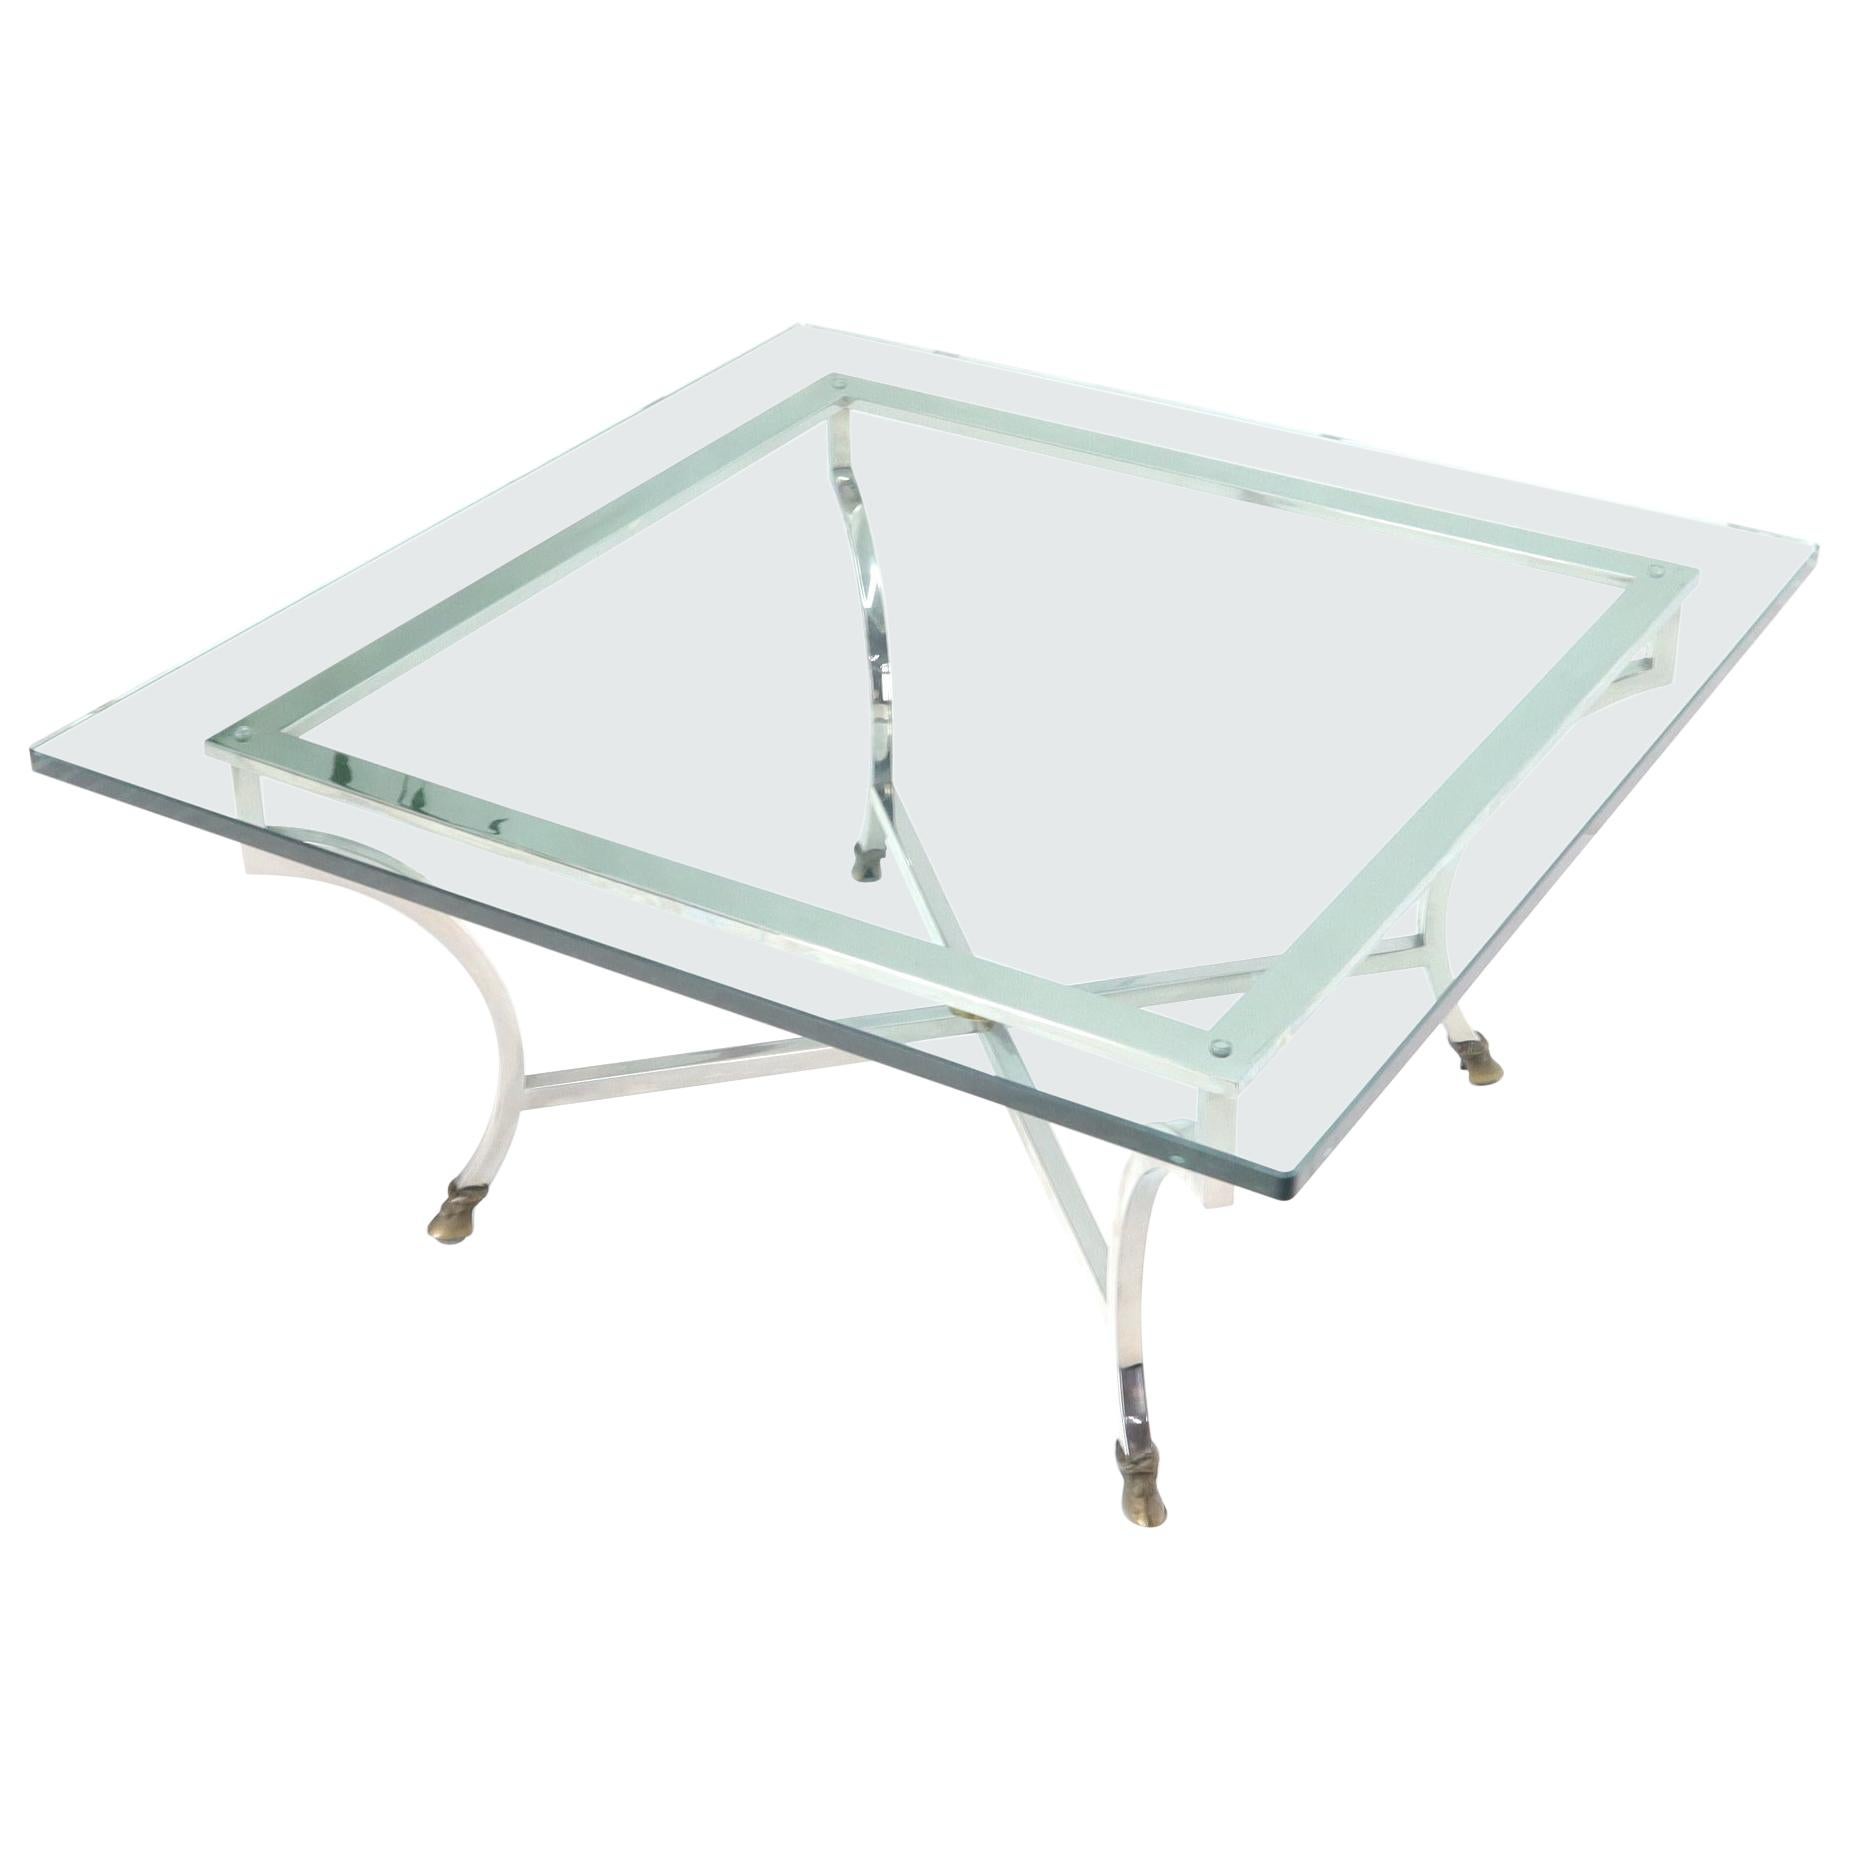 Square Chrome and Brass Hoof Feet Base Thick Glass Top Coffee Table